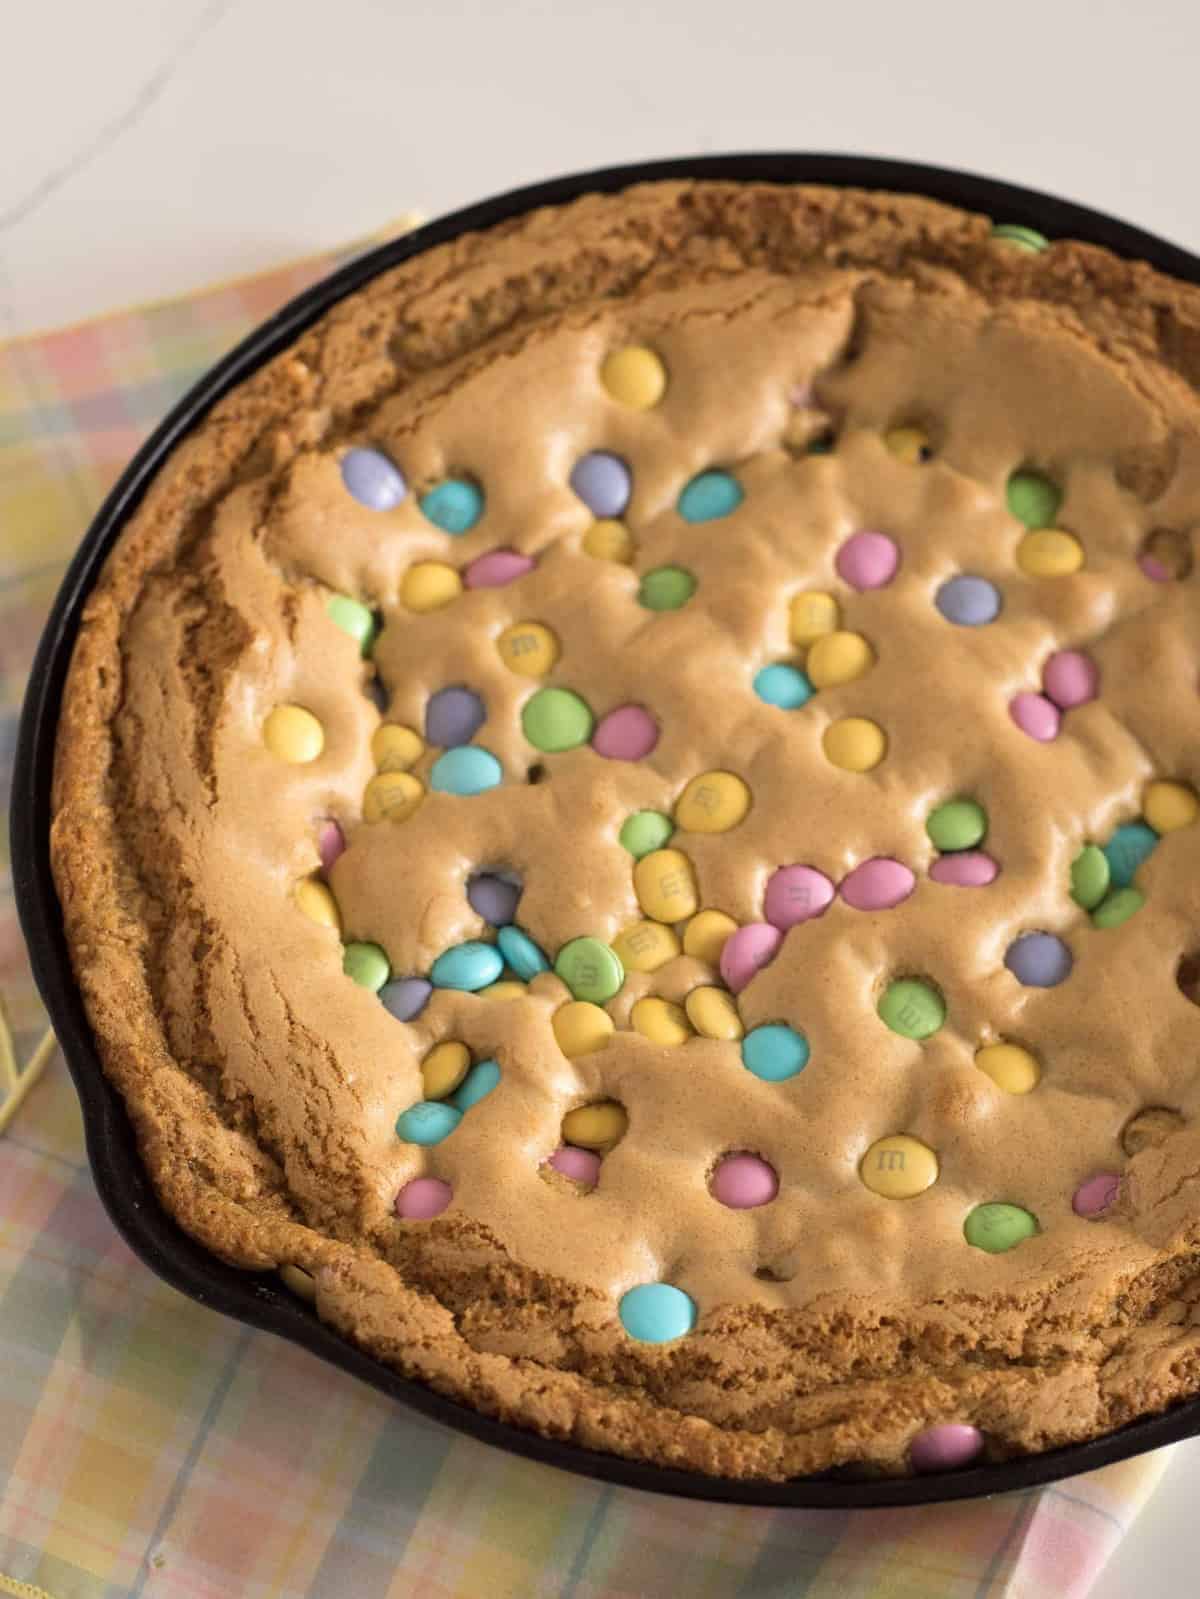 Cast iron skillet filled with a warm skillet cookies topped with pastel MandM candies